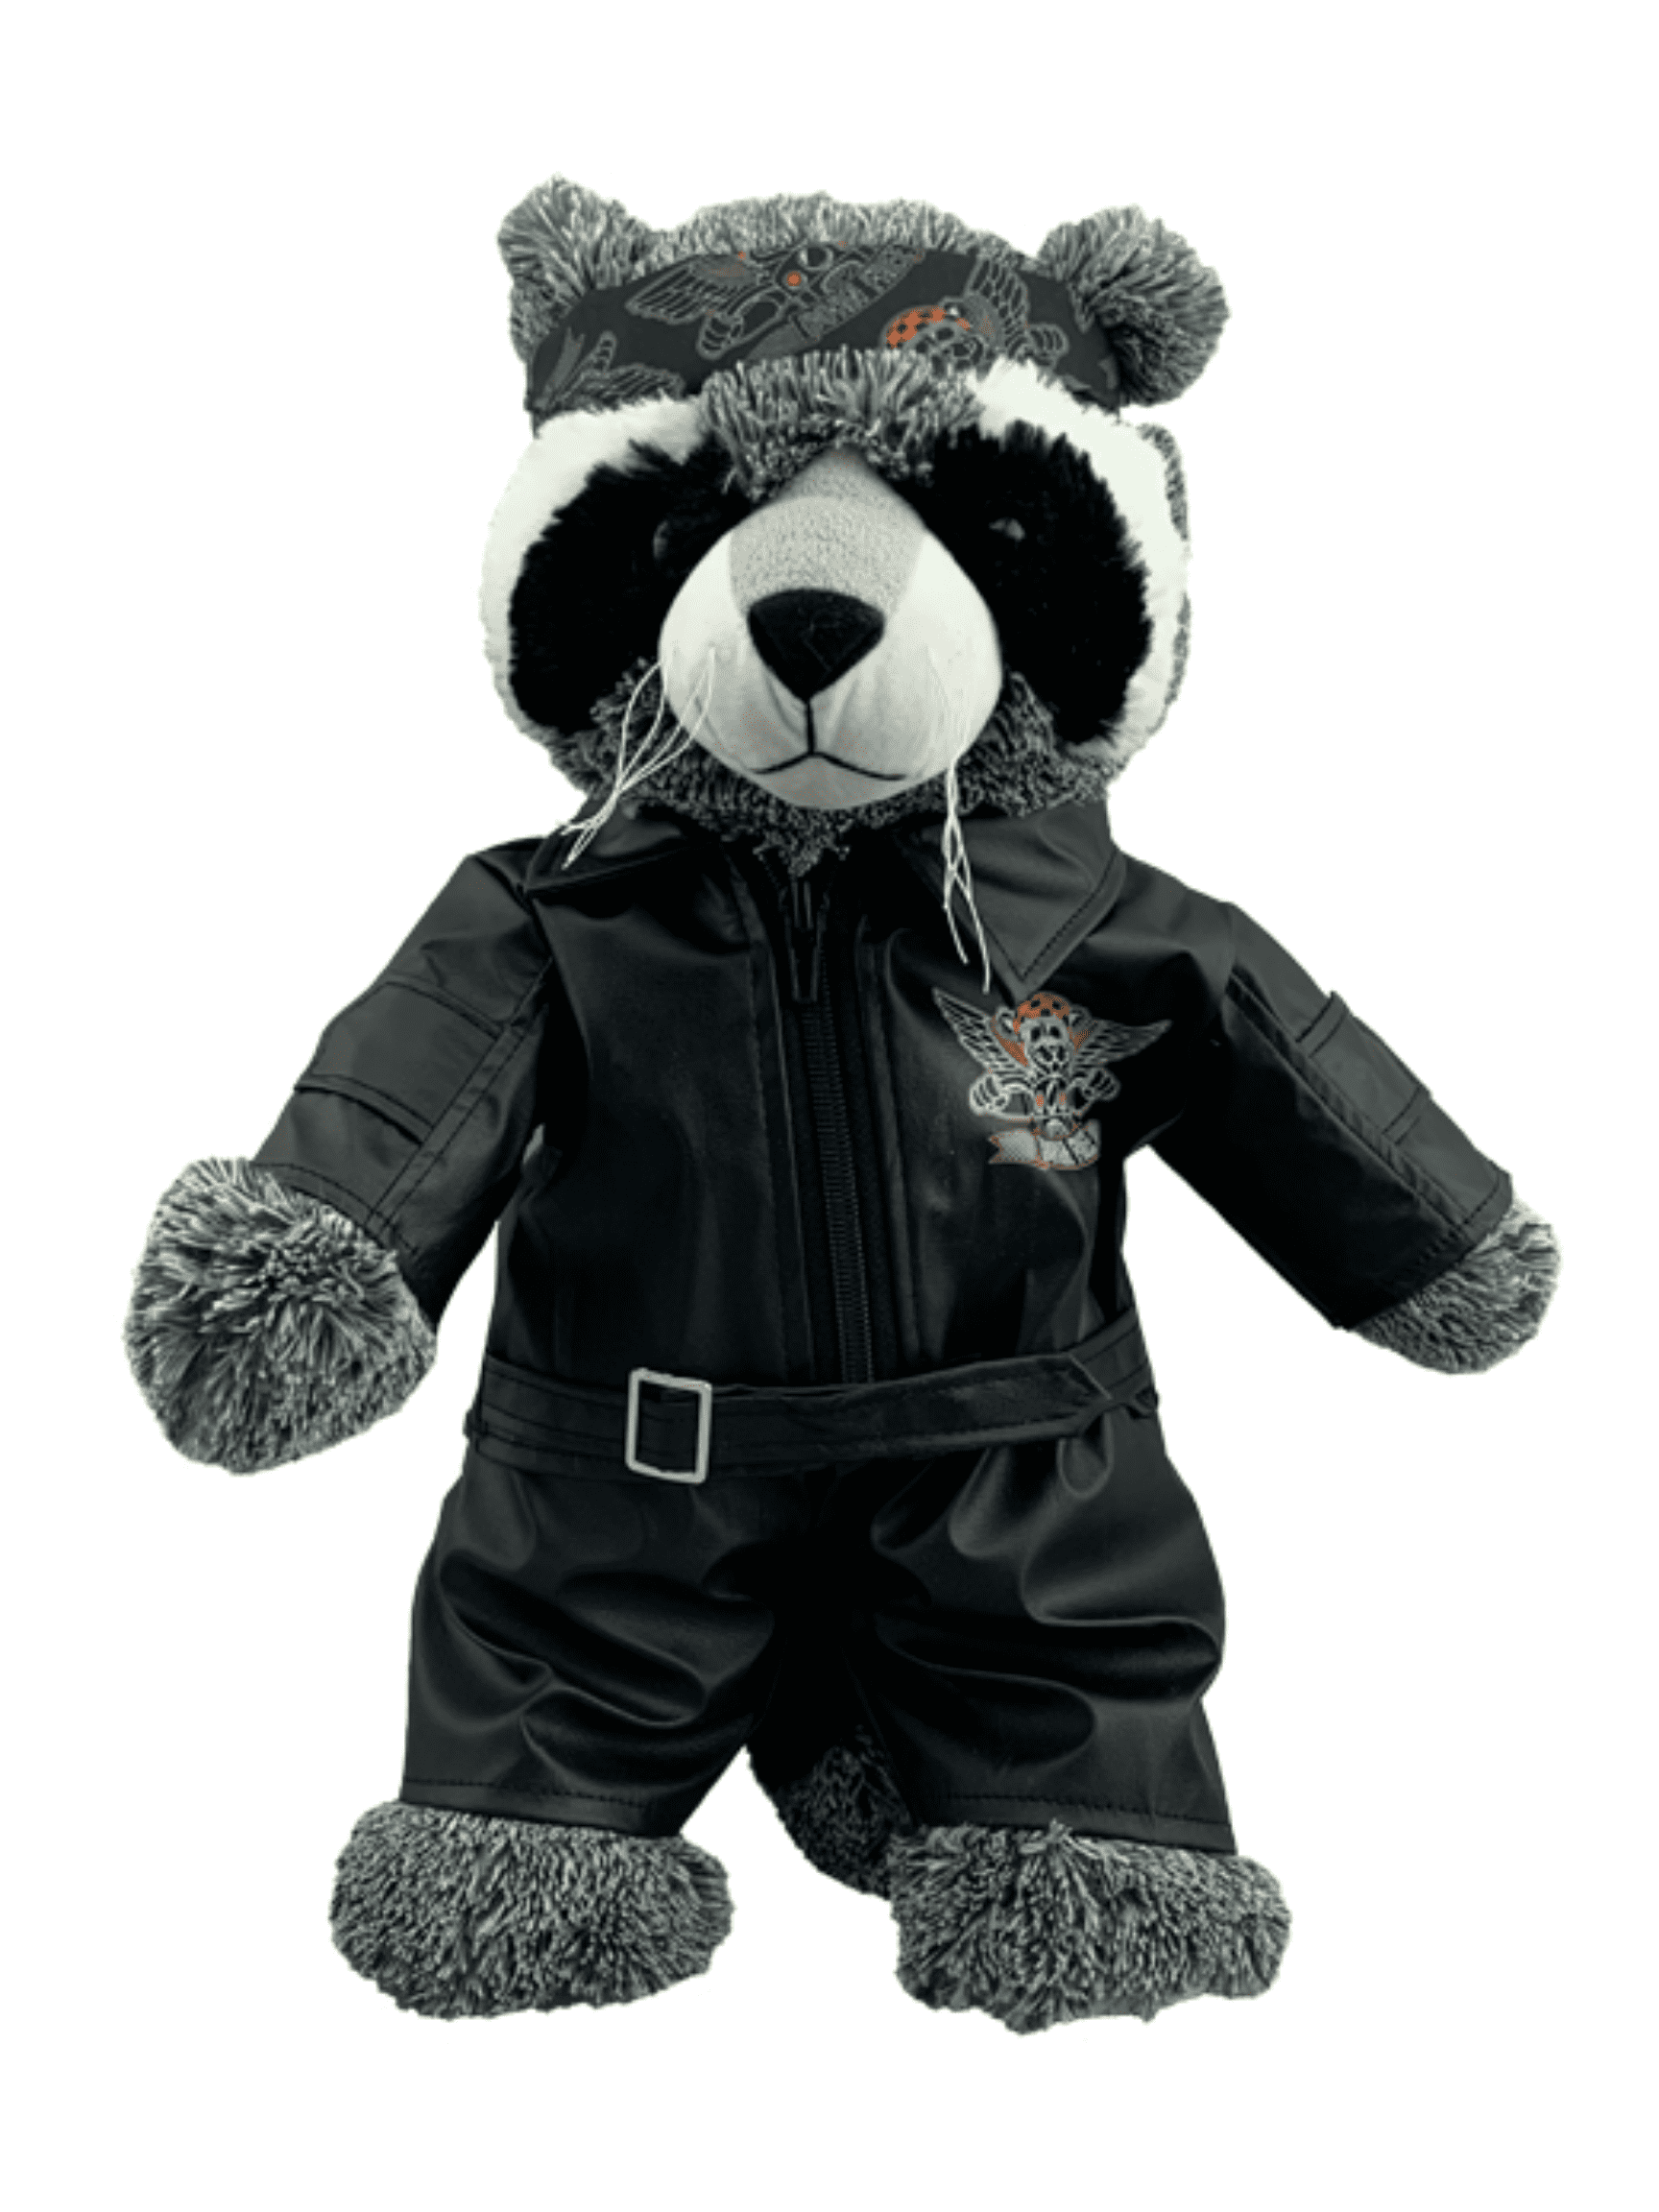 TEDDY BEAR Outfit EASY RIDER BIKER CLOTHES Fit 8"-10" Build-a-bear !!NEW!! 